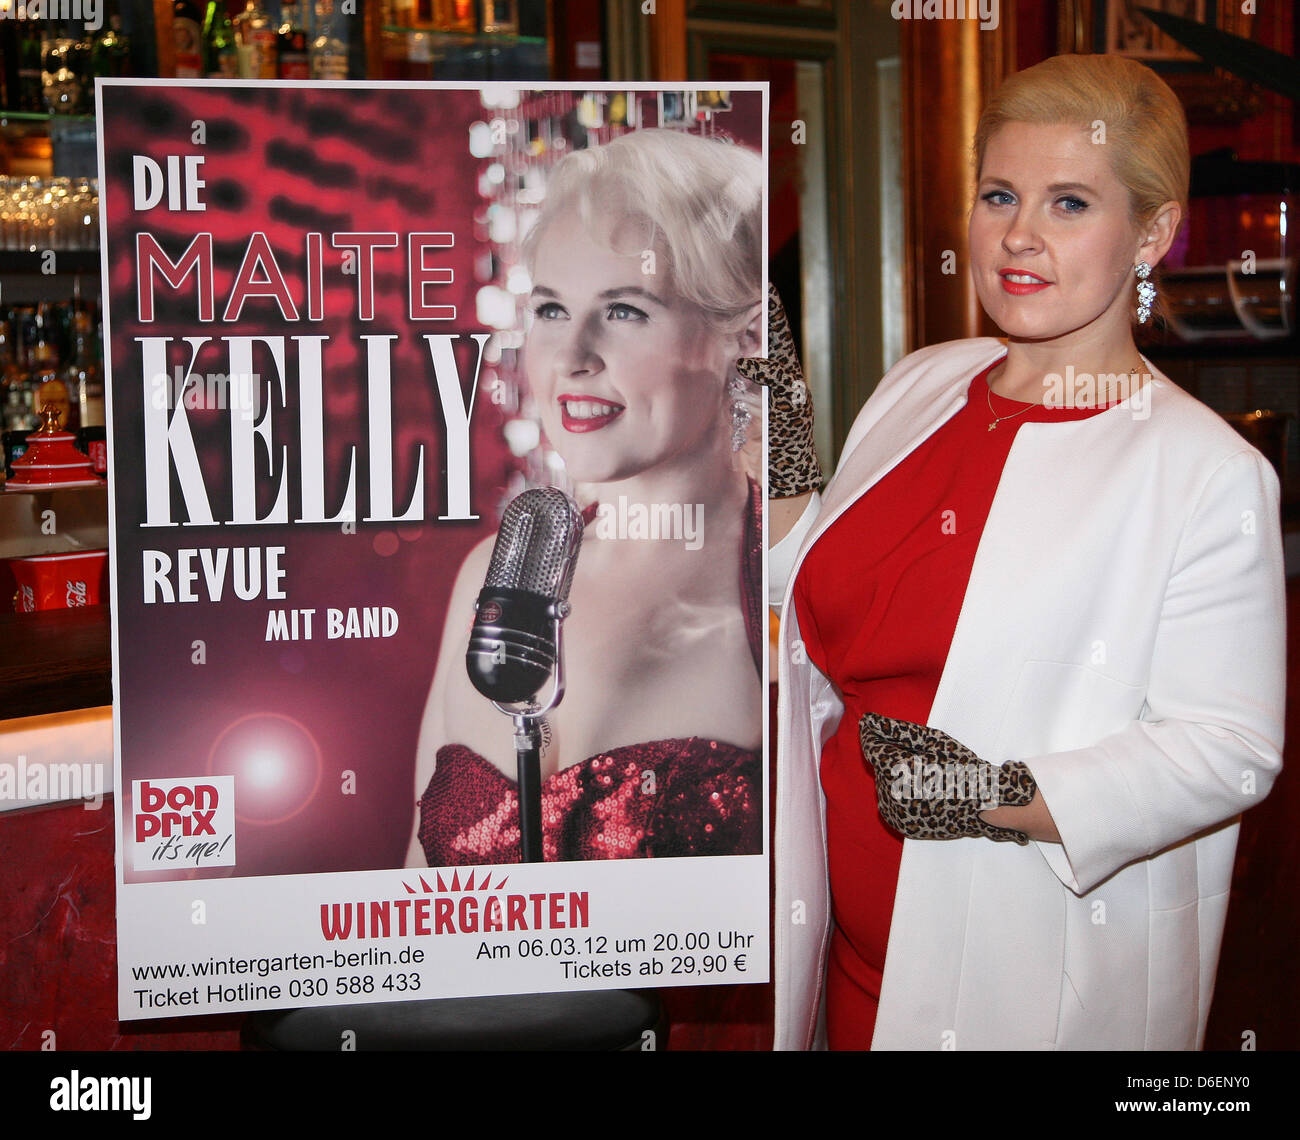 Irish-American singer Maite Kelly poses at Wintergarten Theater in Berlin, Germany, 07 February 2012. The artist is presenting her revue, which premiers on 06 March 2012. Photo: Stephanie Pilick Stock Photo